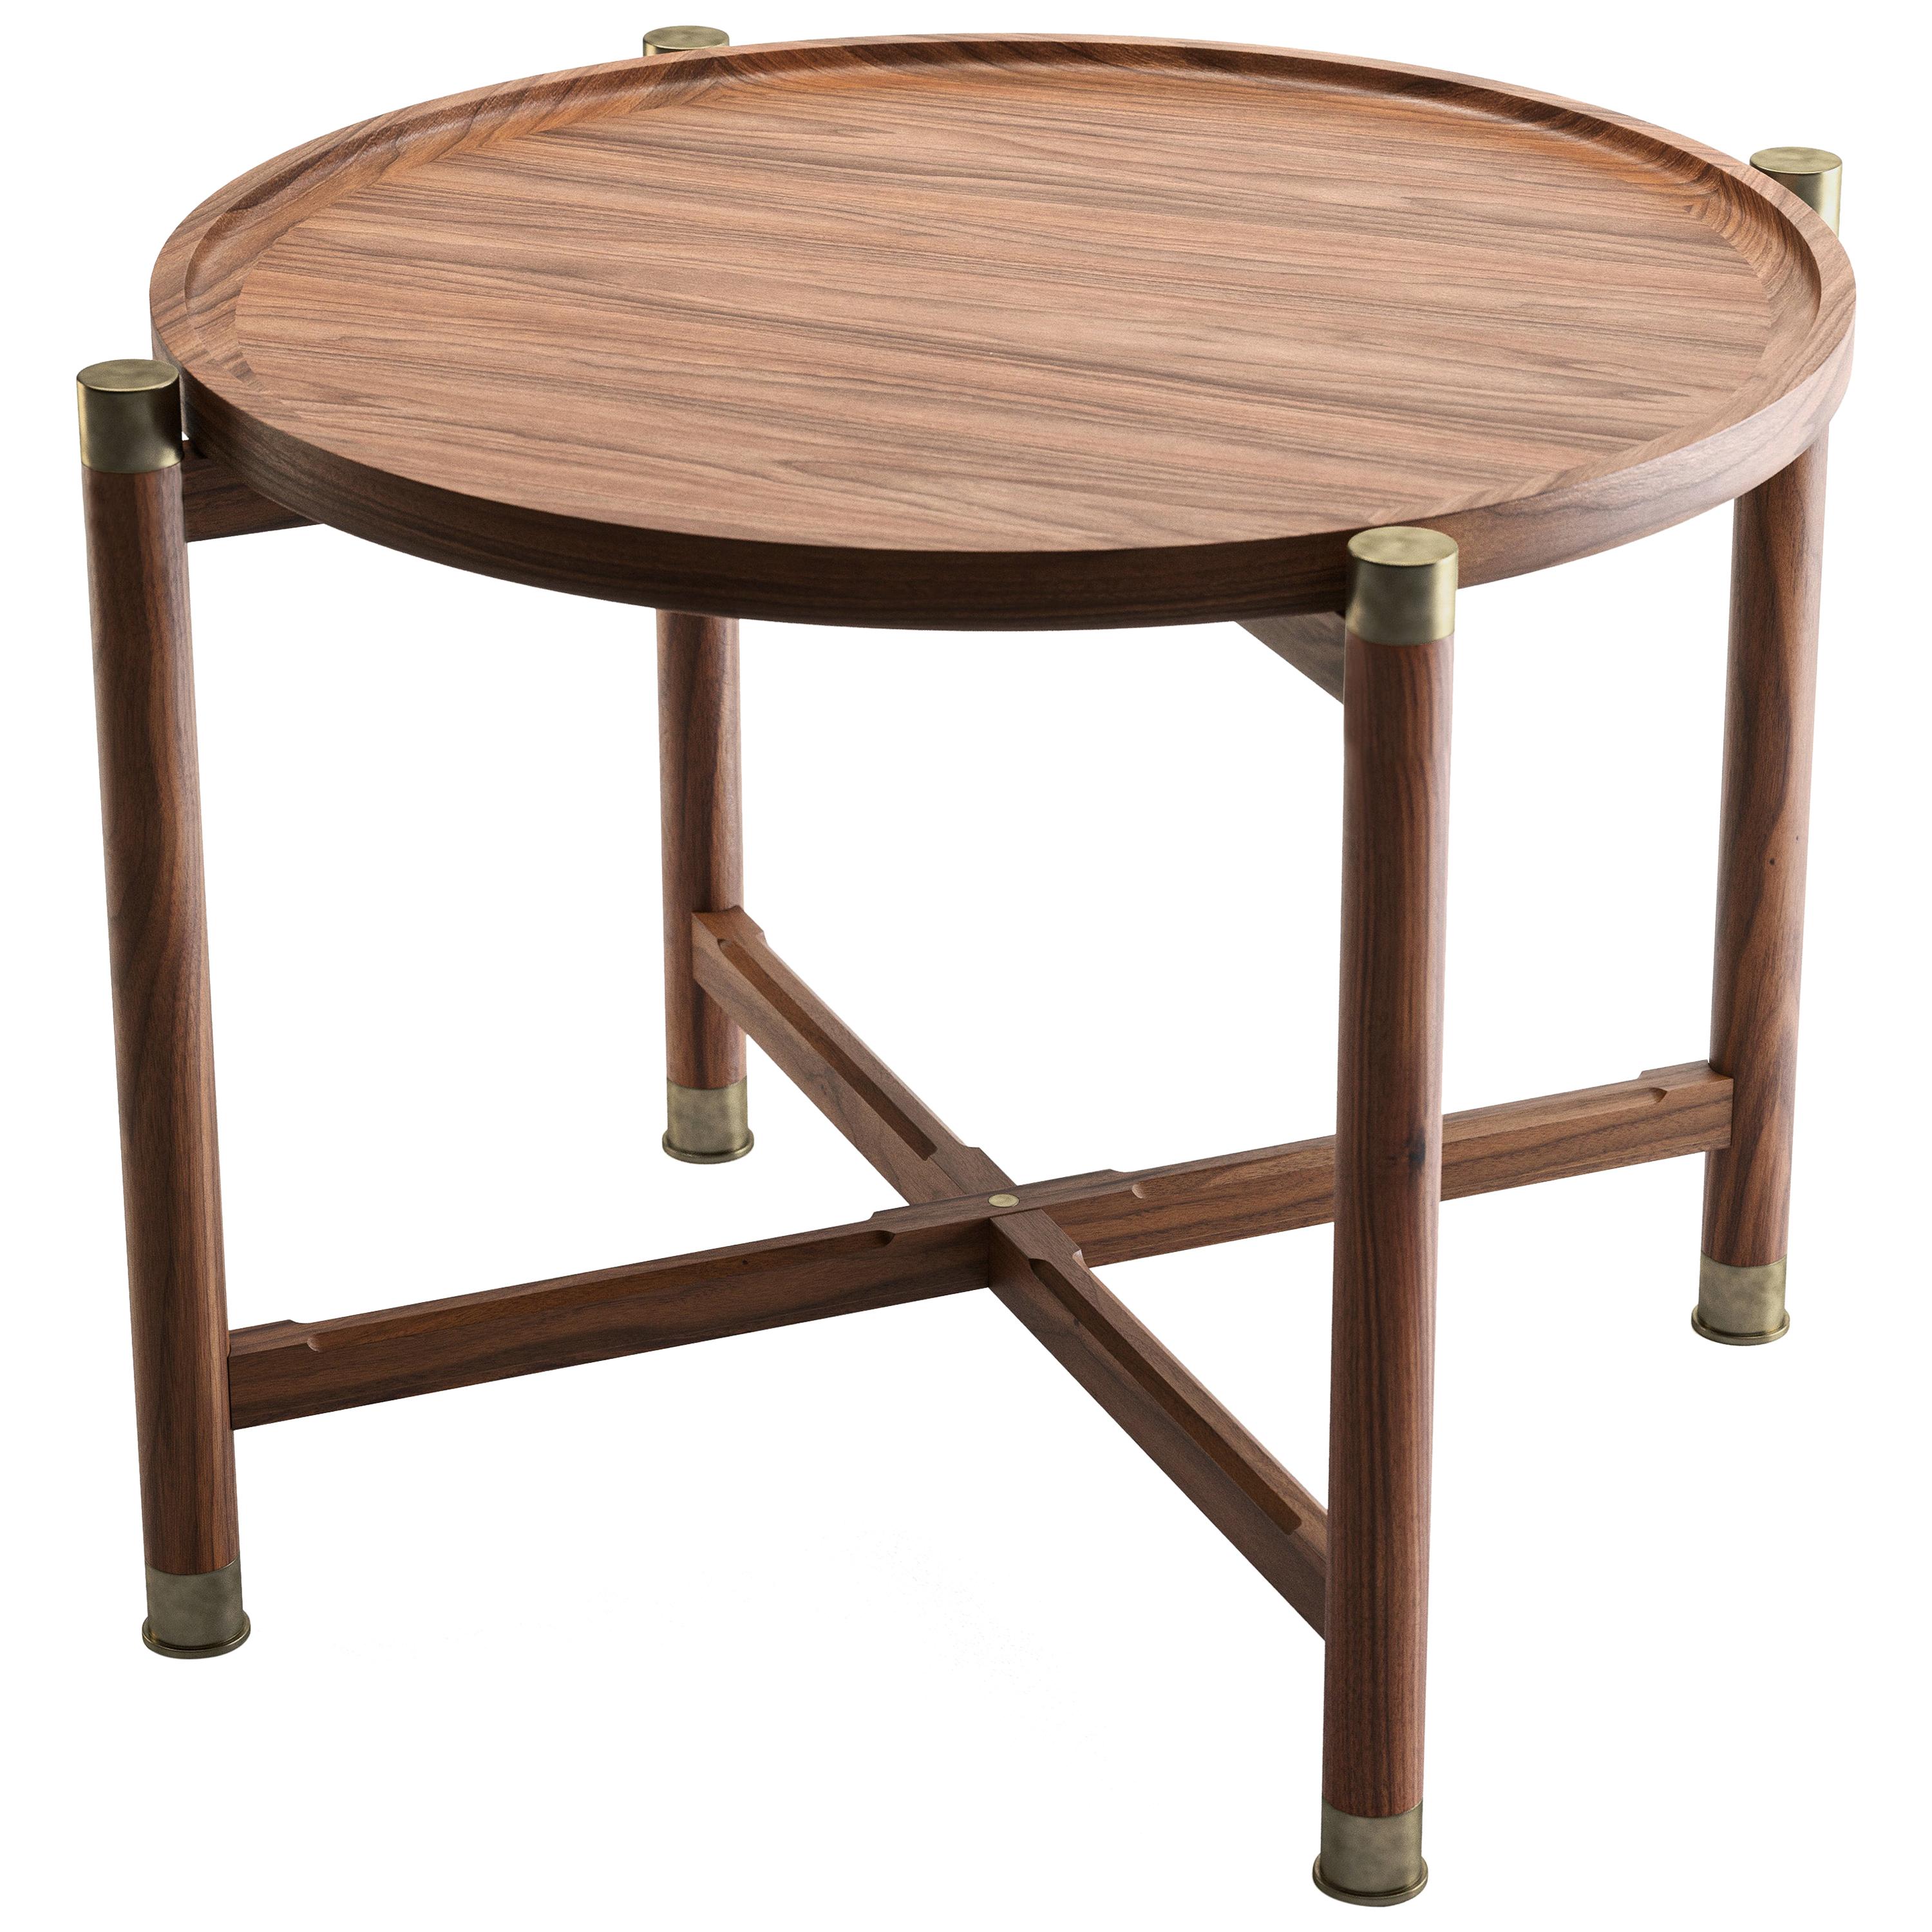 Otto Round Side Table in Light Walnut with Antique Brass Fittings